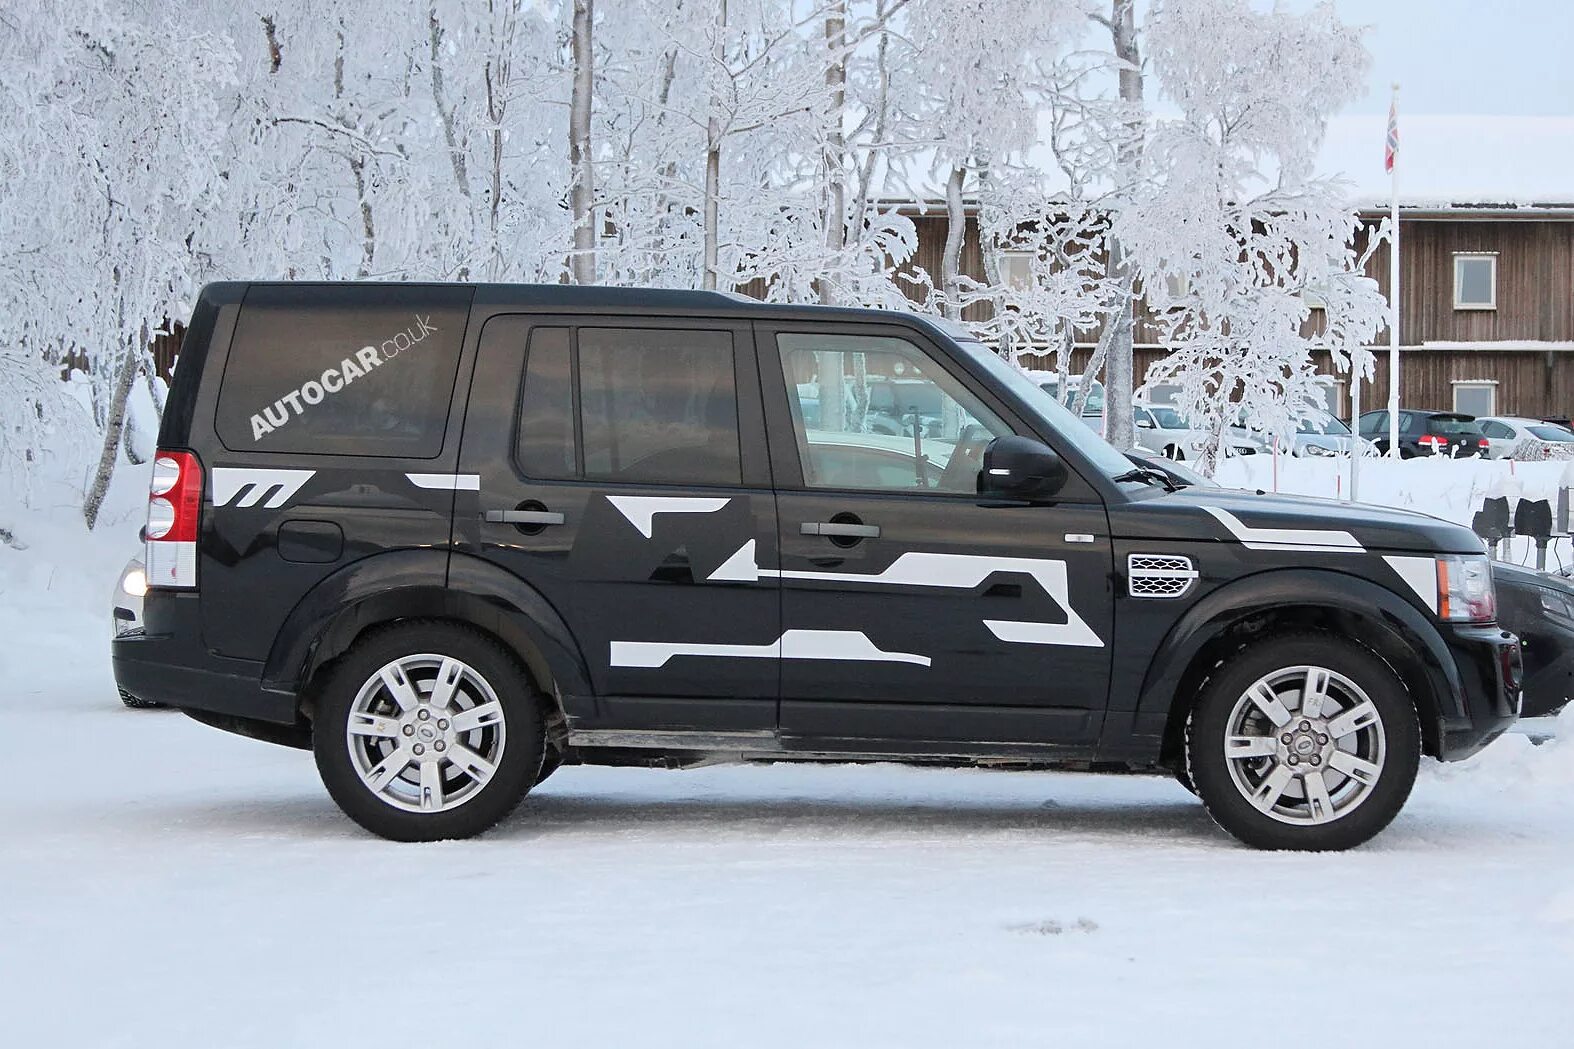 Land Rover Discovery 3. Land Rover Discovery 3 в камуфляже. Land Rover Discovery 3 новый. Оклейка Discovery 4. Тест дискавери